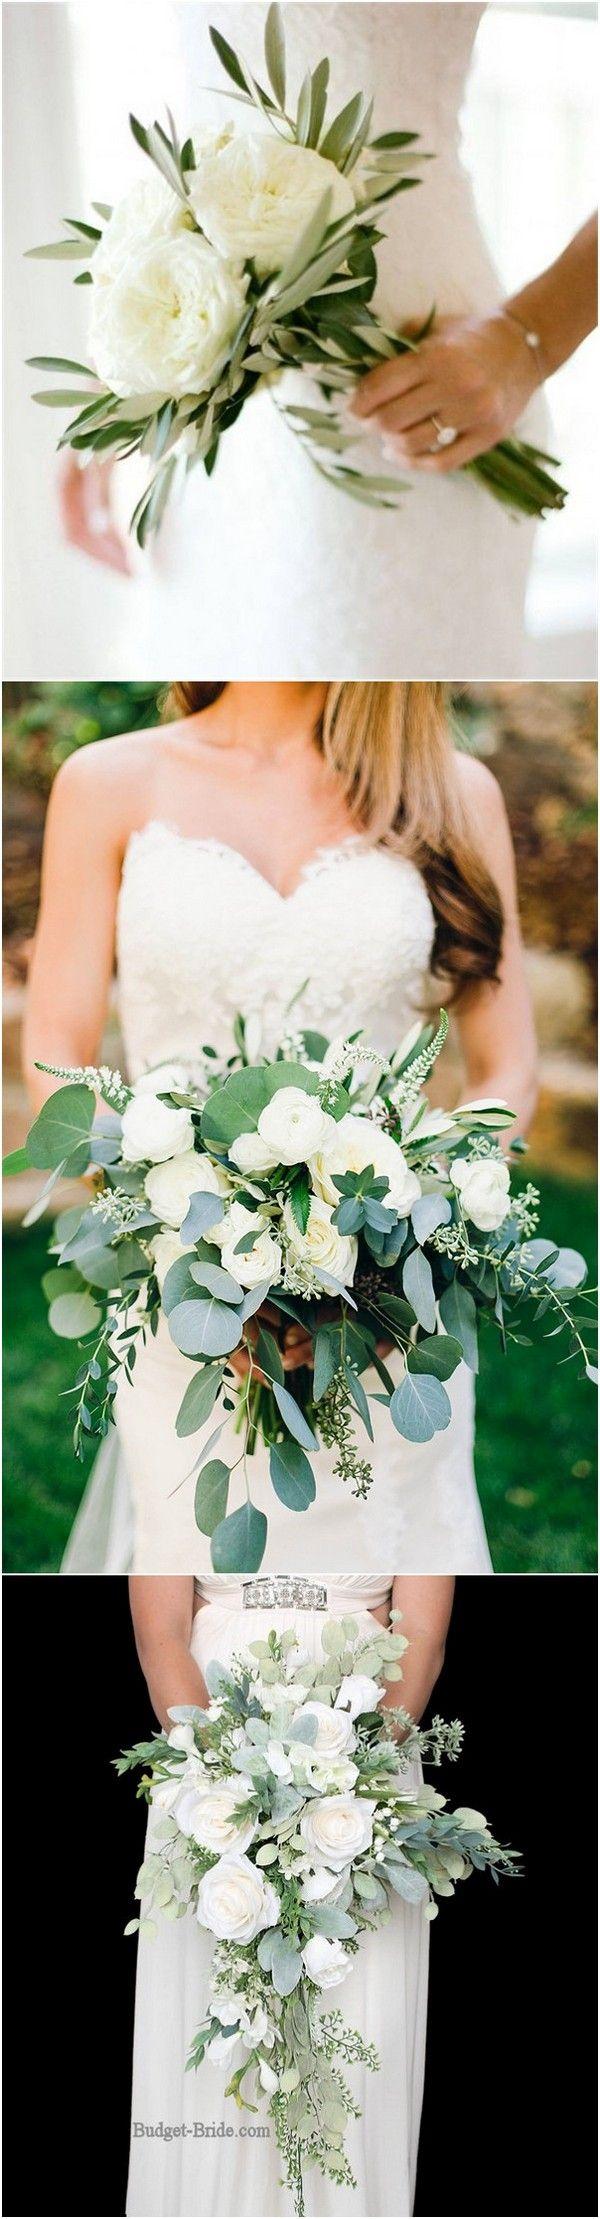 Wedding - Top 10 White And Green Wedding Bouquet Ideas You’ll Love - Page 2 Of 2